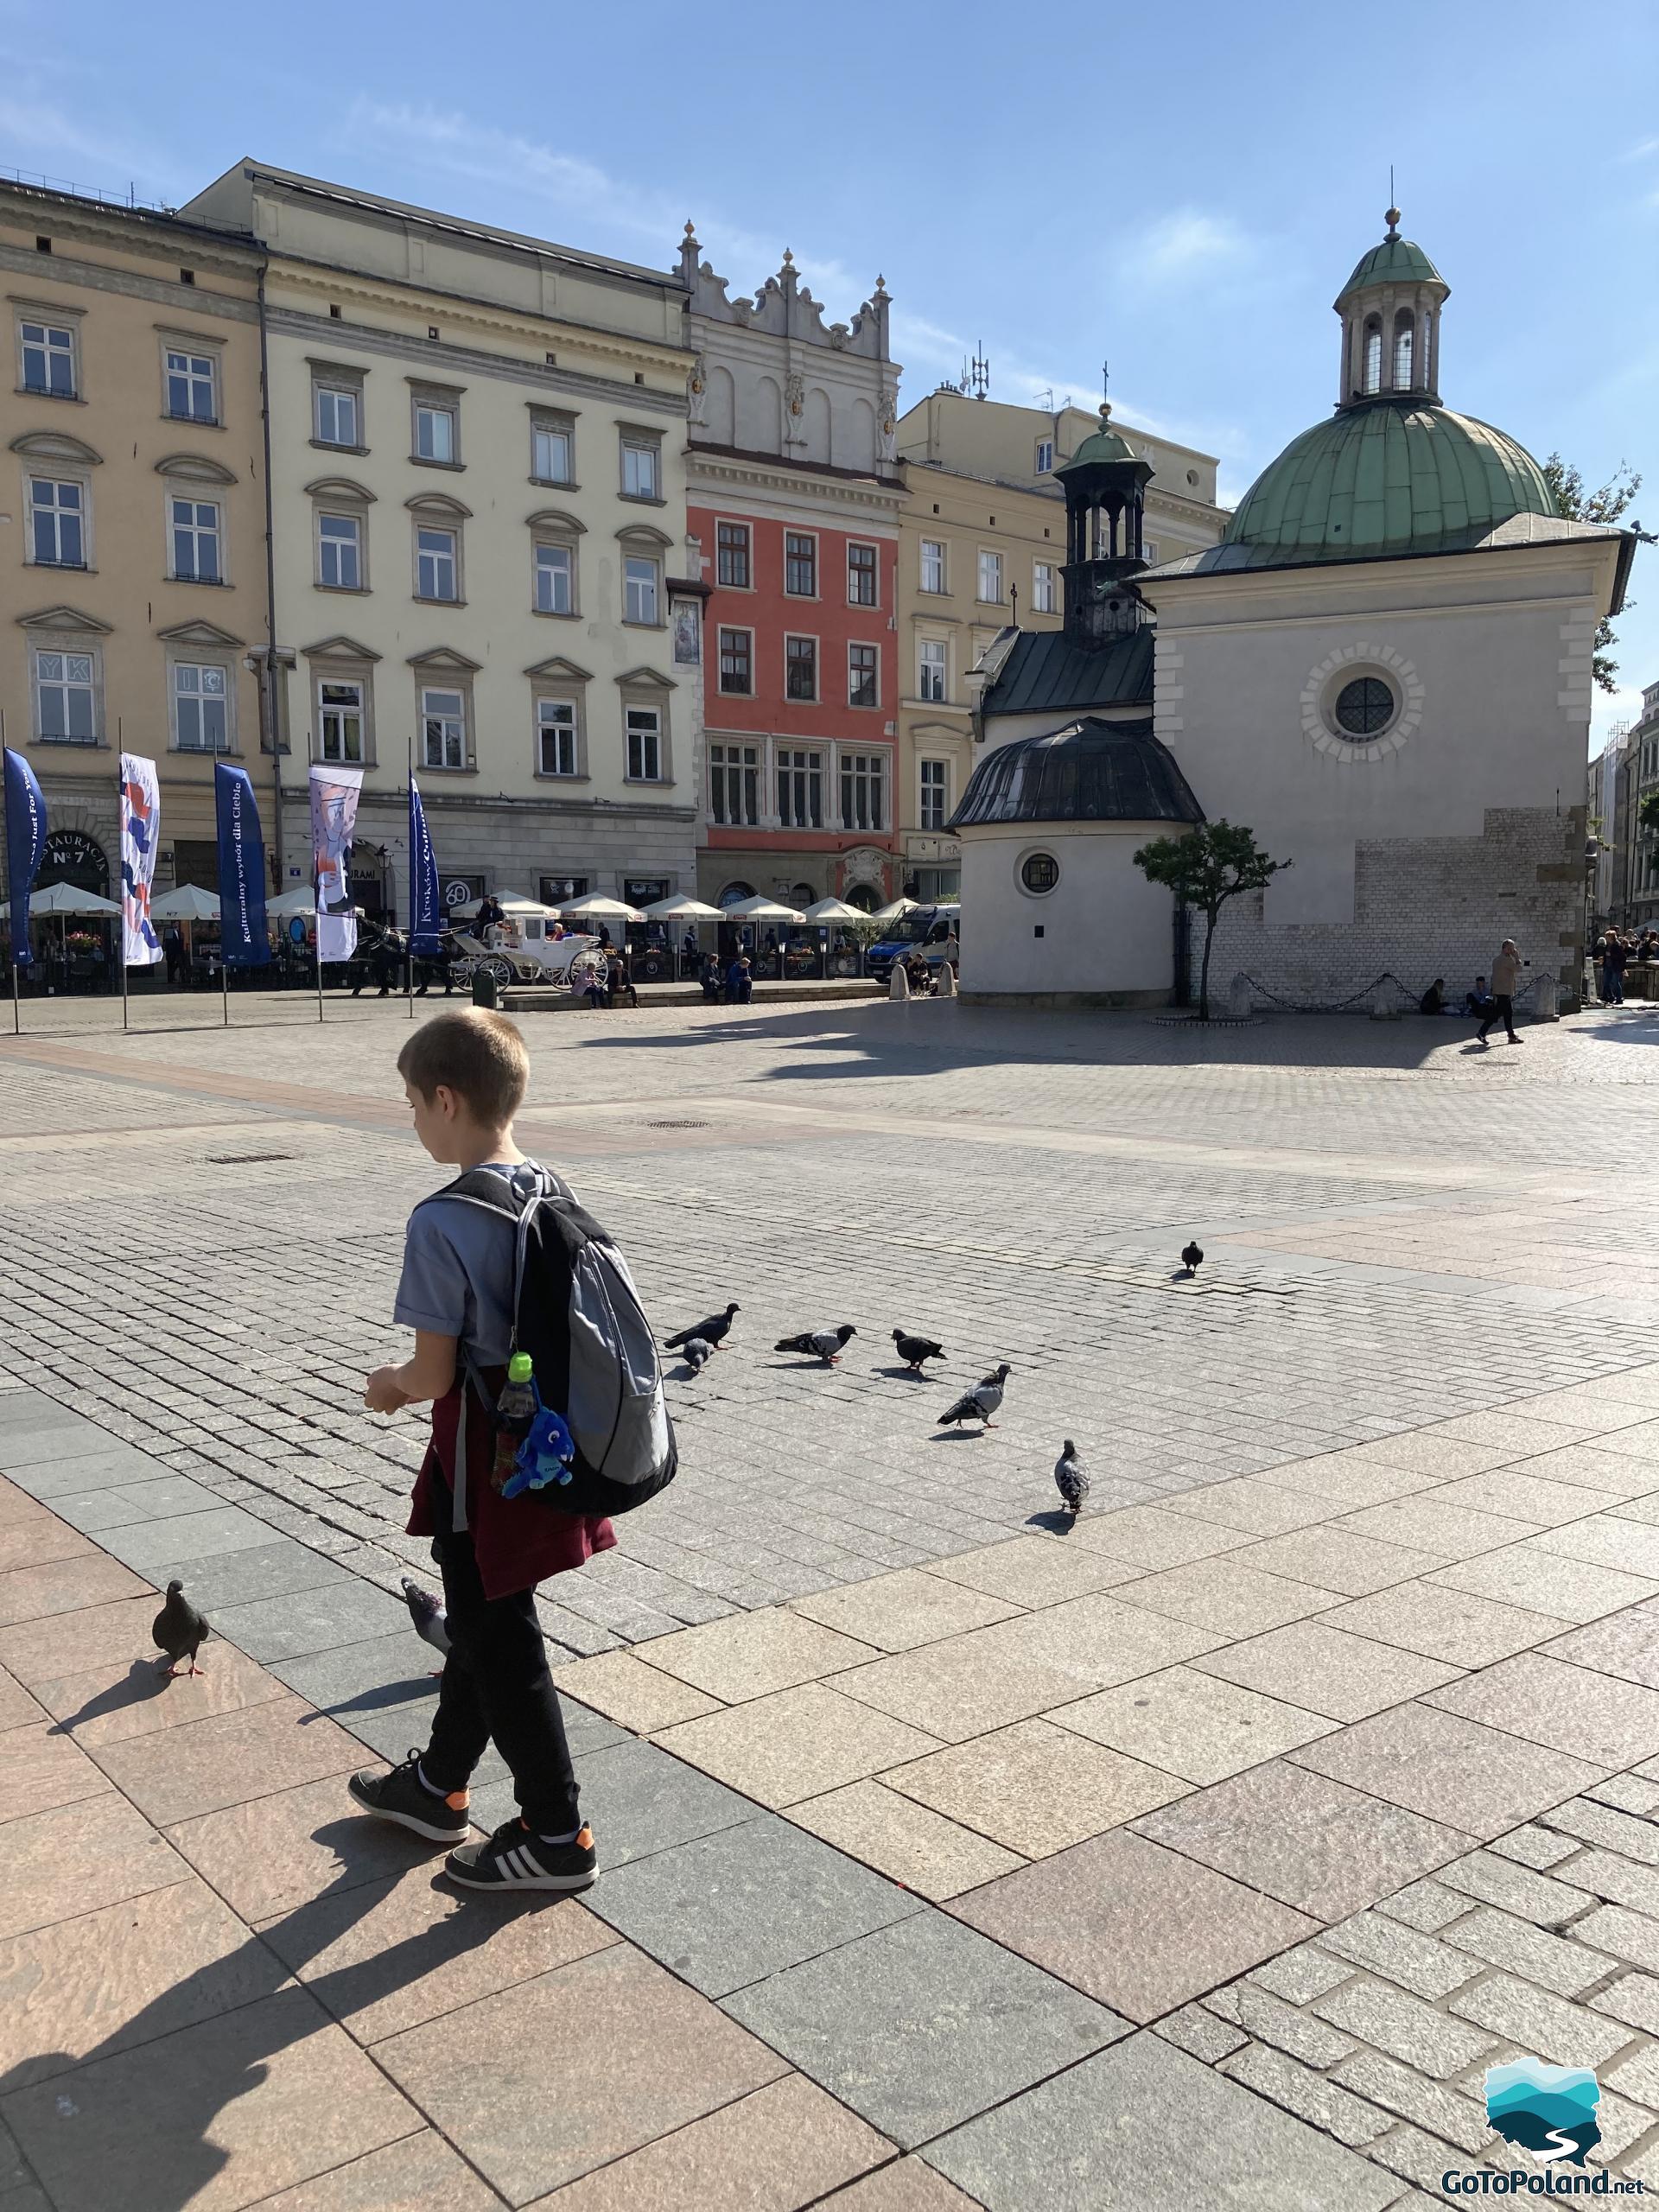 in the foreground is a boy and pigeons, behind him are tenement houses and a small romanesque church